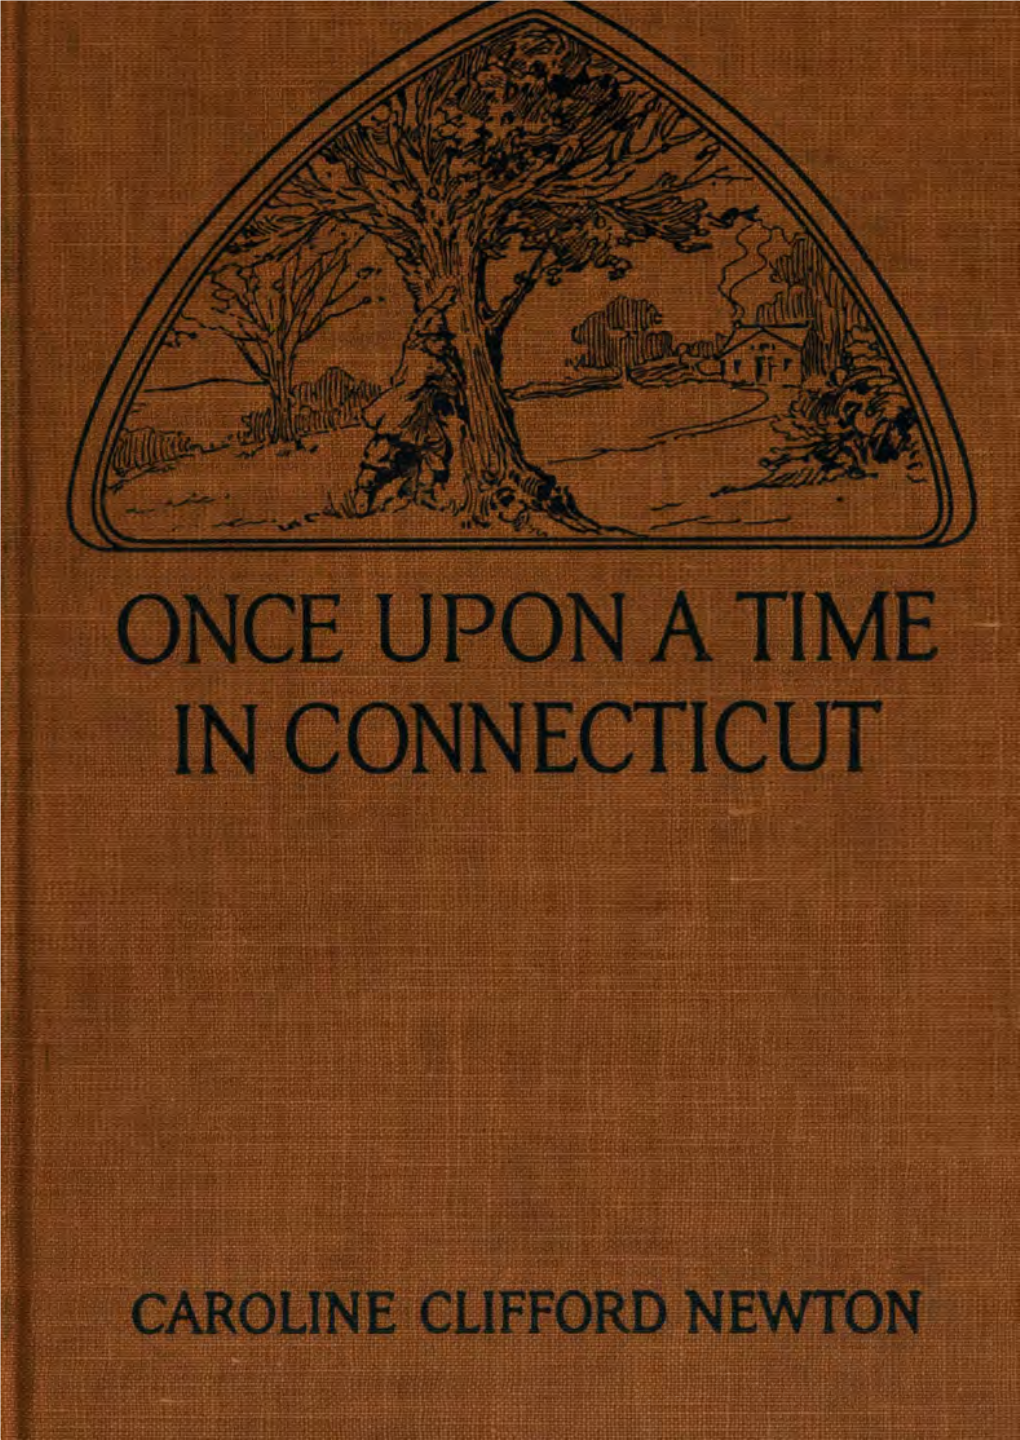 Once Upon a Time in Connecticut